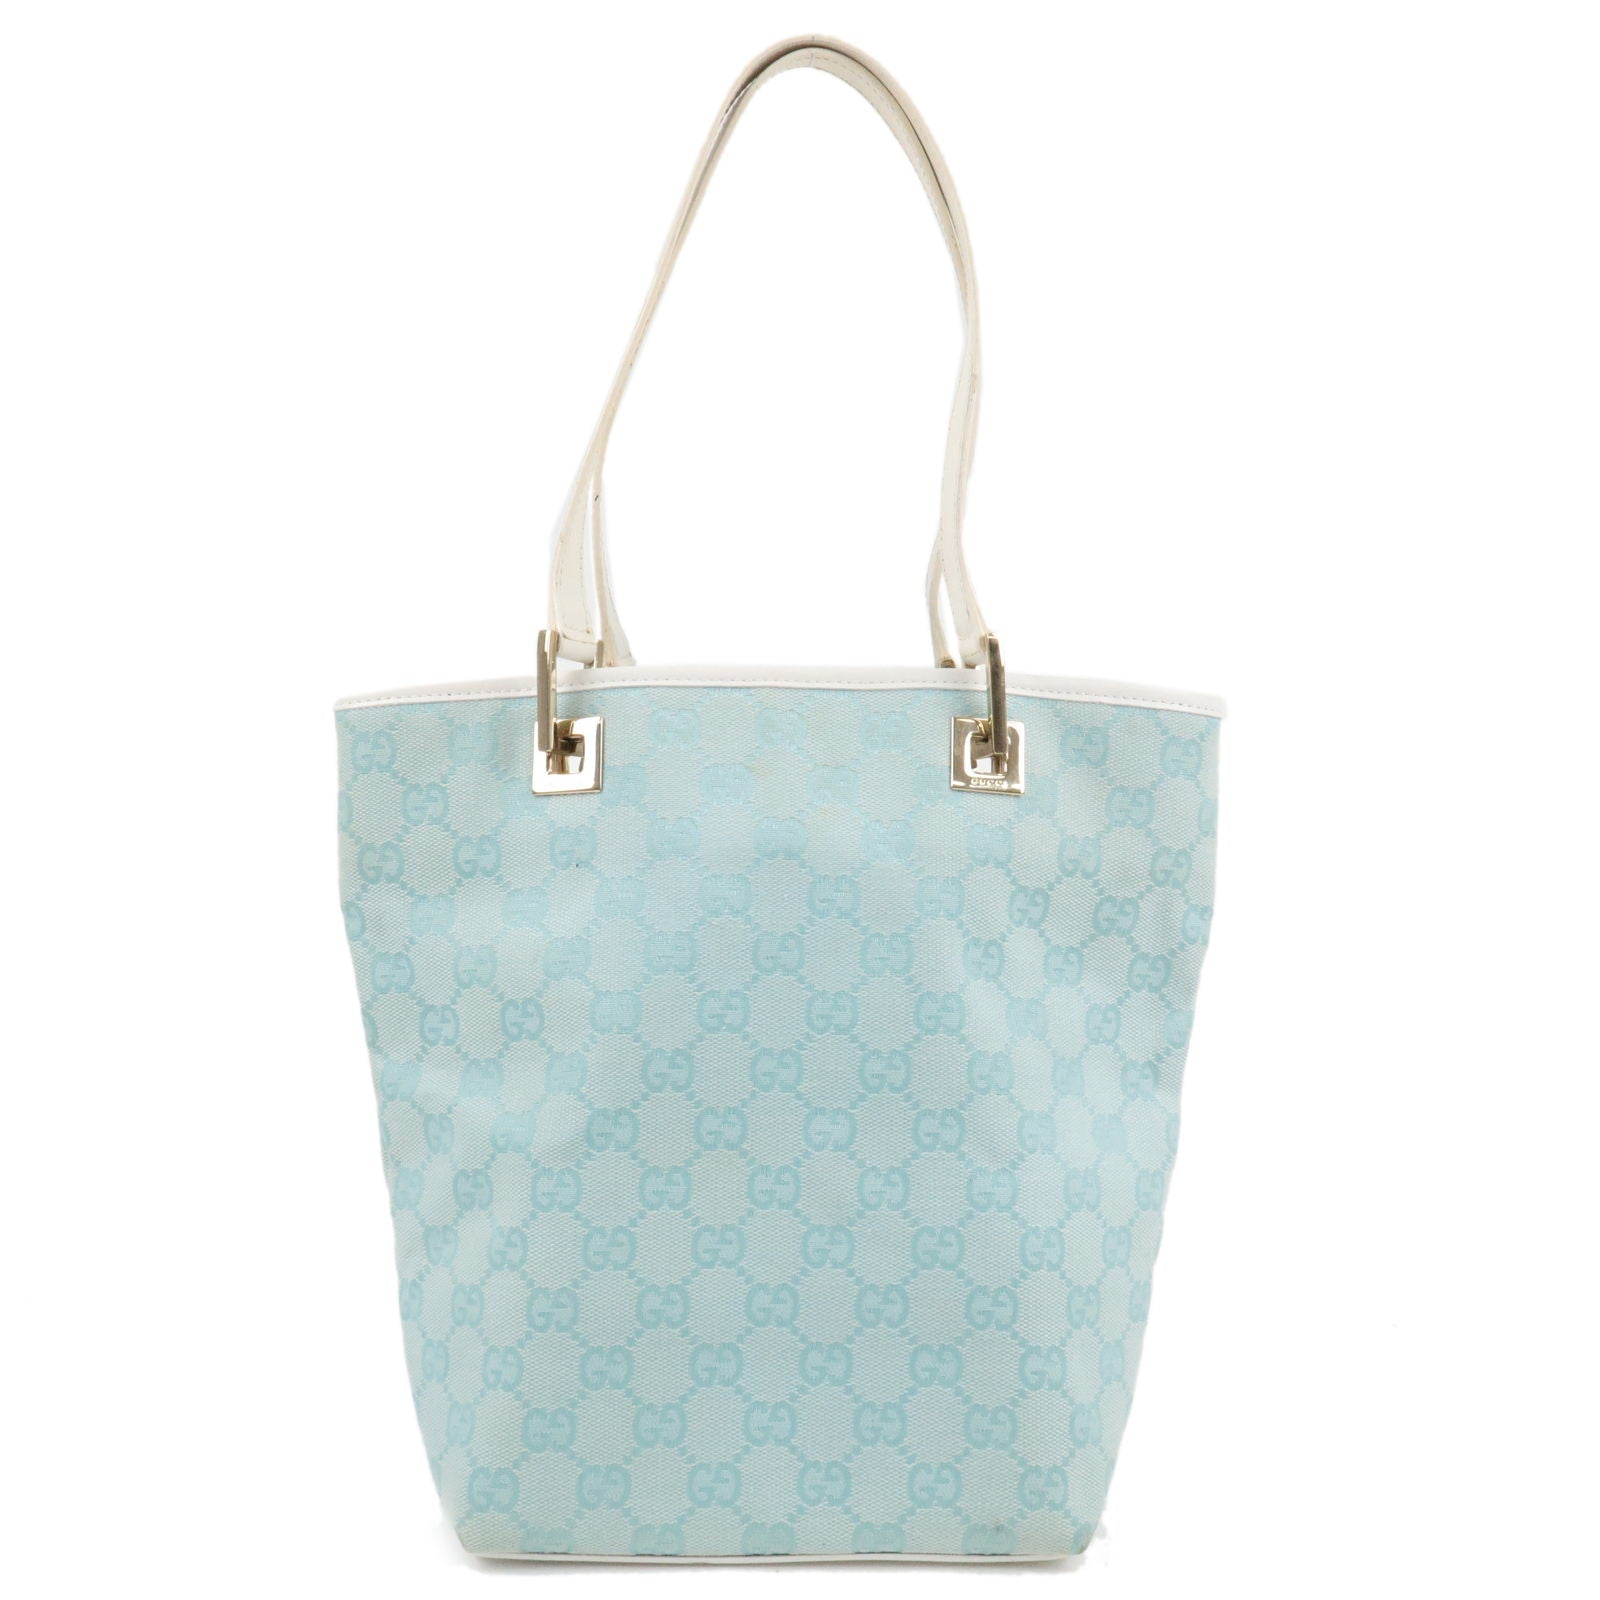 GUCCI-GG-Canvas-Leather-Tote-Bag-Light-Blue-002.1099